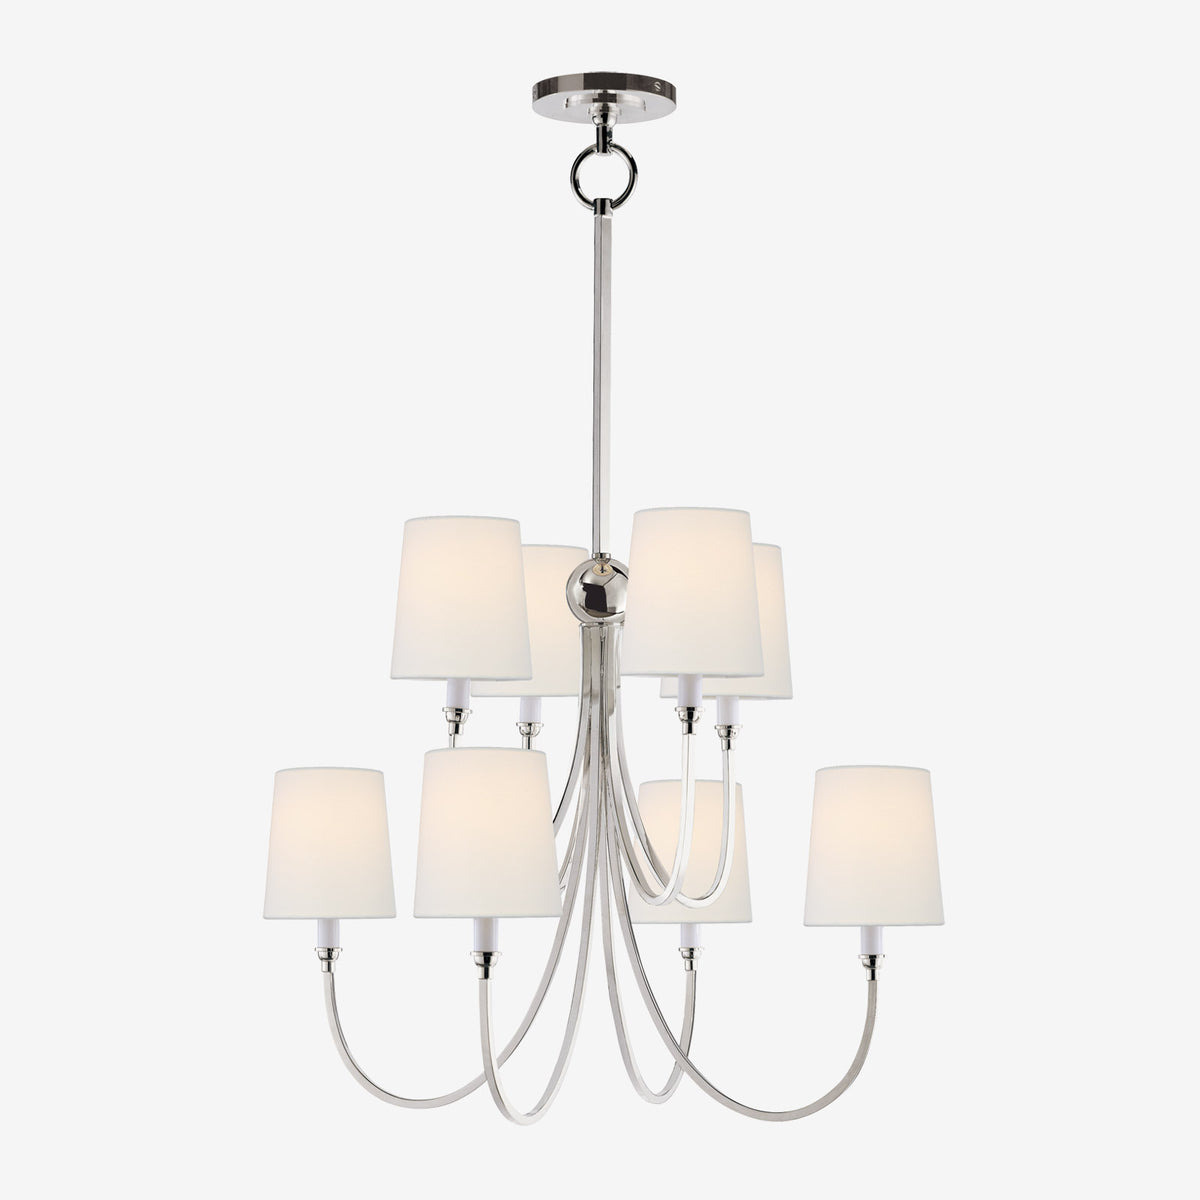 RL5685WBNBWP by Visual Comfort - Dalfern Large Chandelier in Waxed